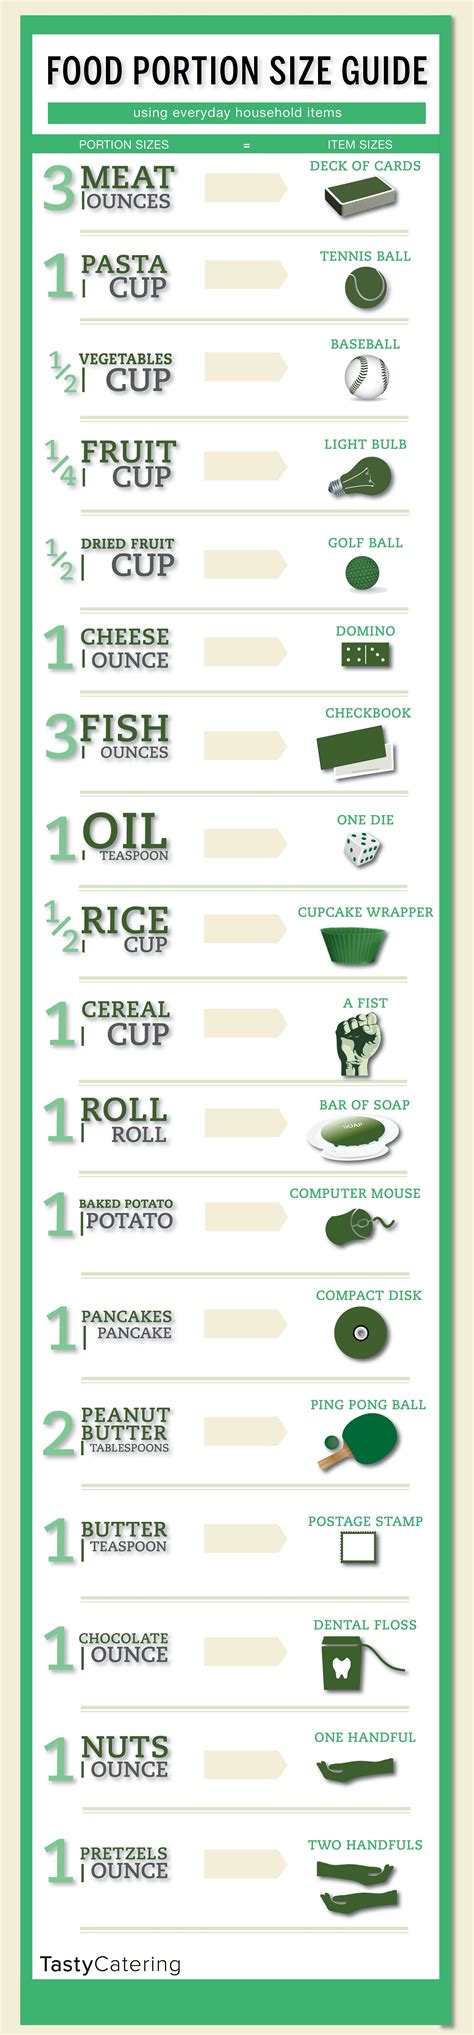 Food Portion Size Guide Using Everyday Household Items